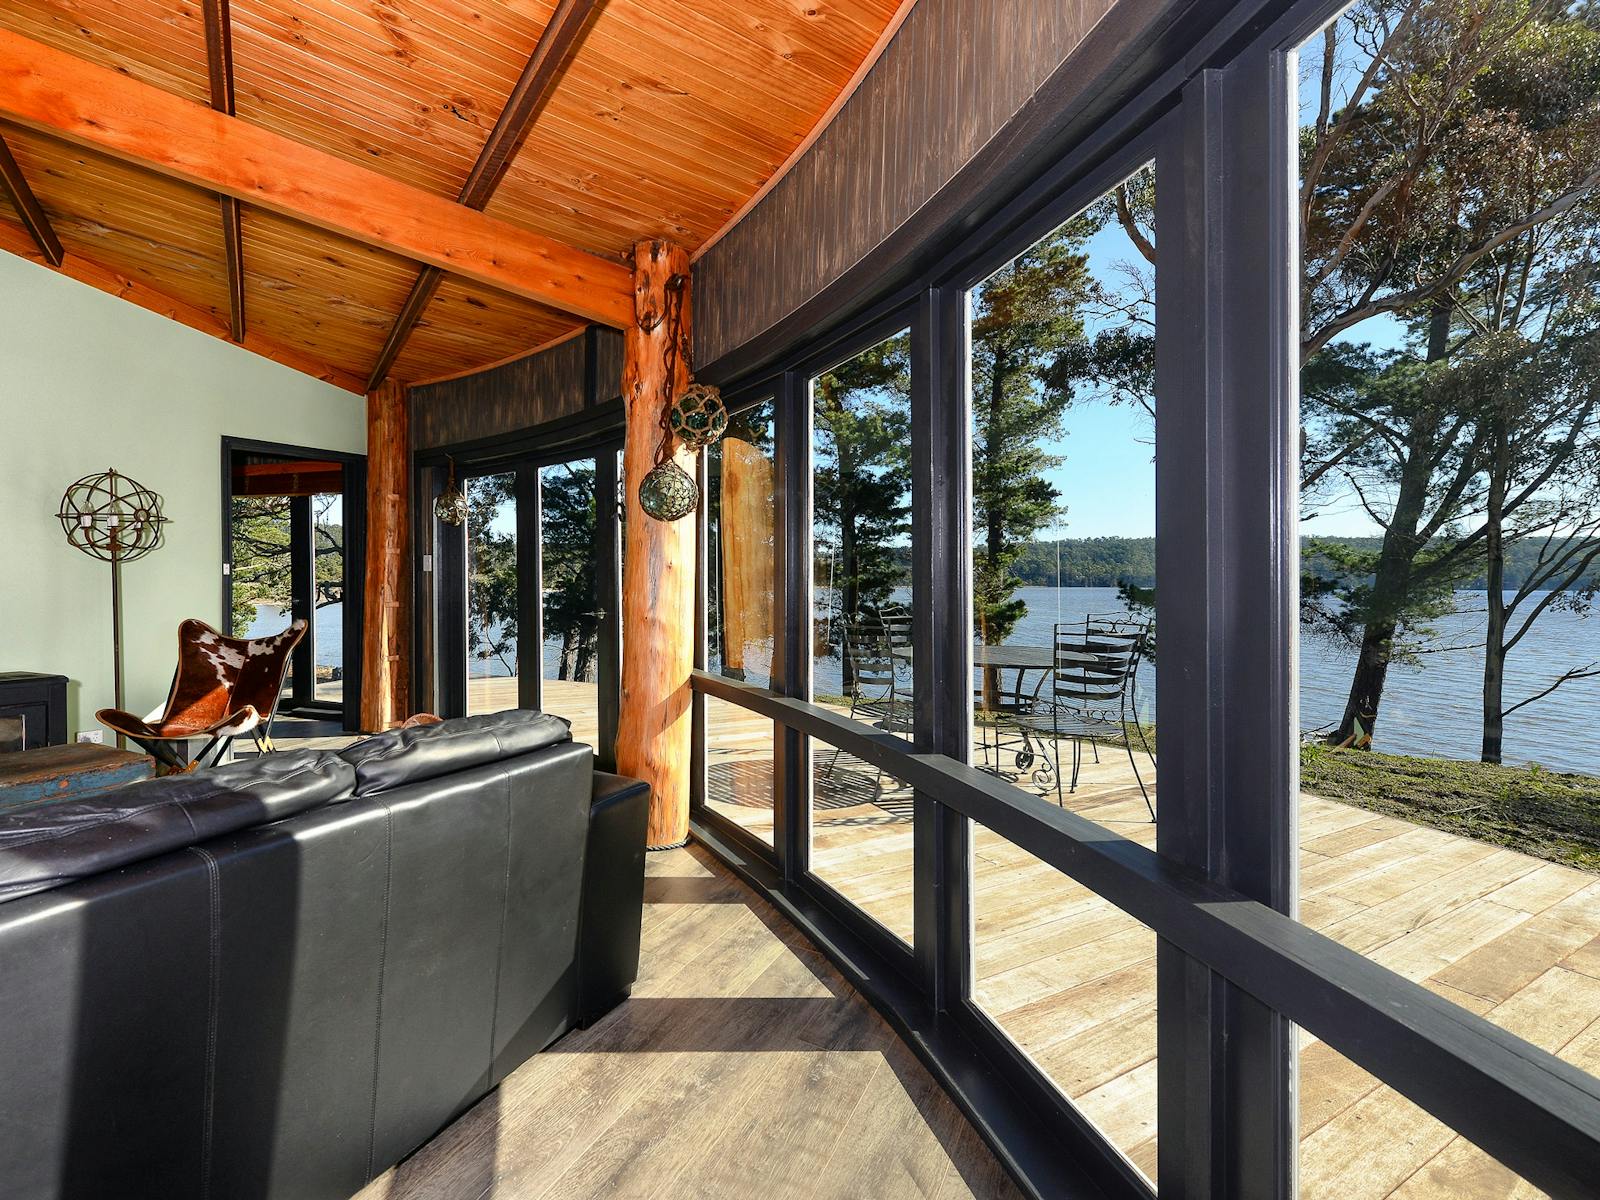 Taylors Bay Cottage:  lounge area and view over Taylors Bay.